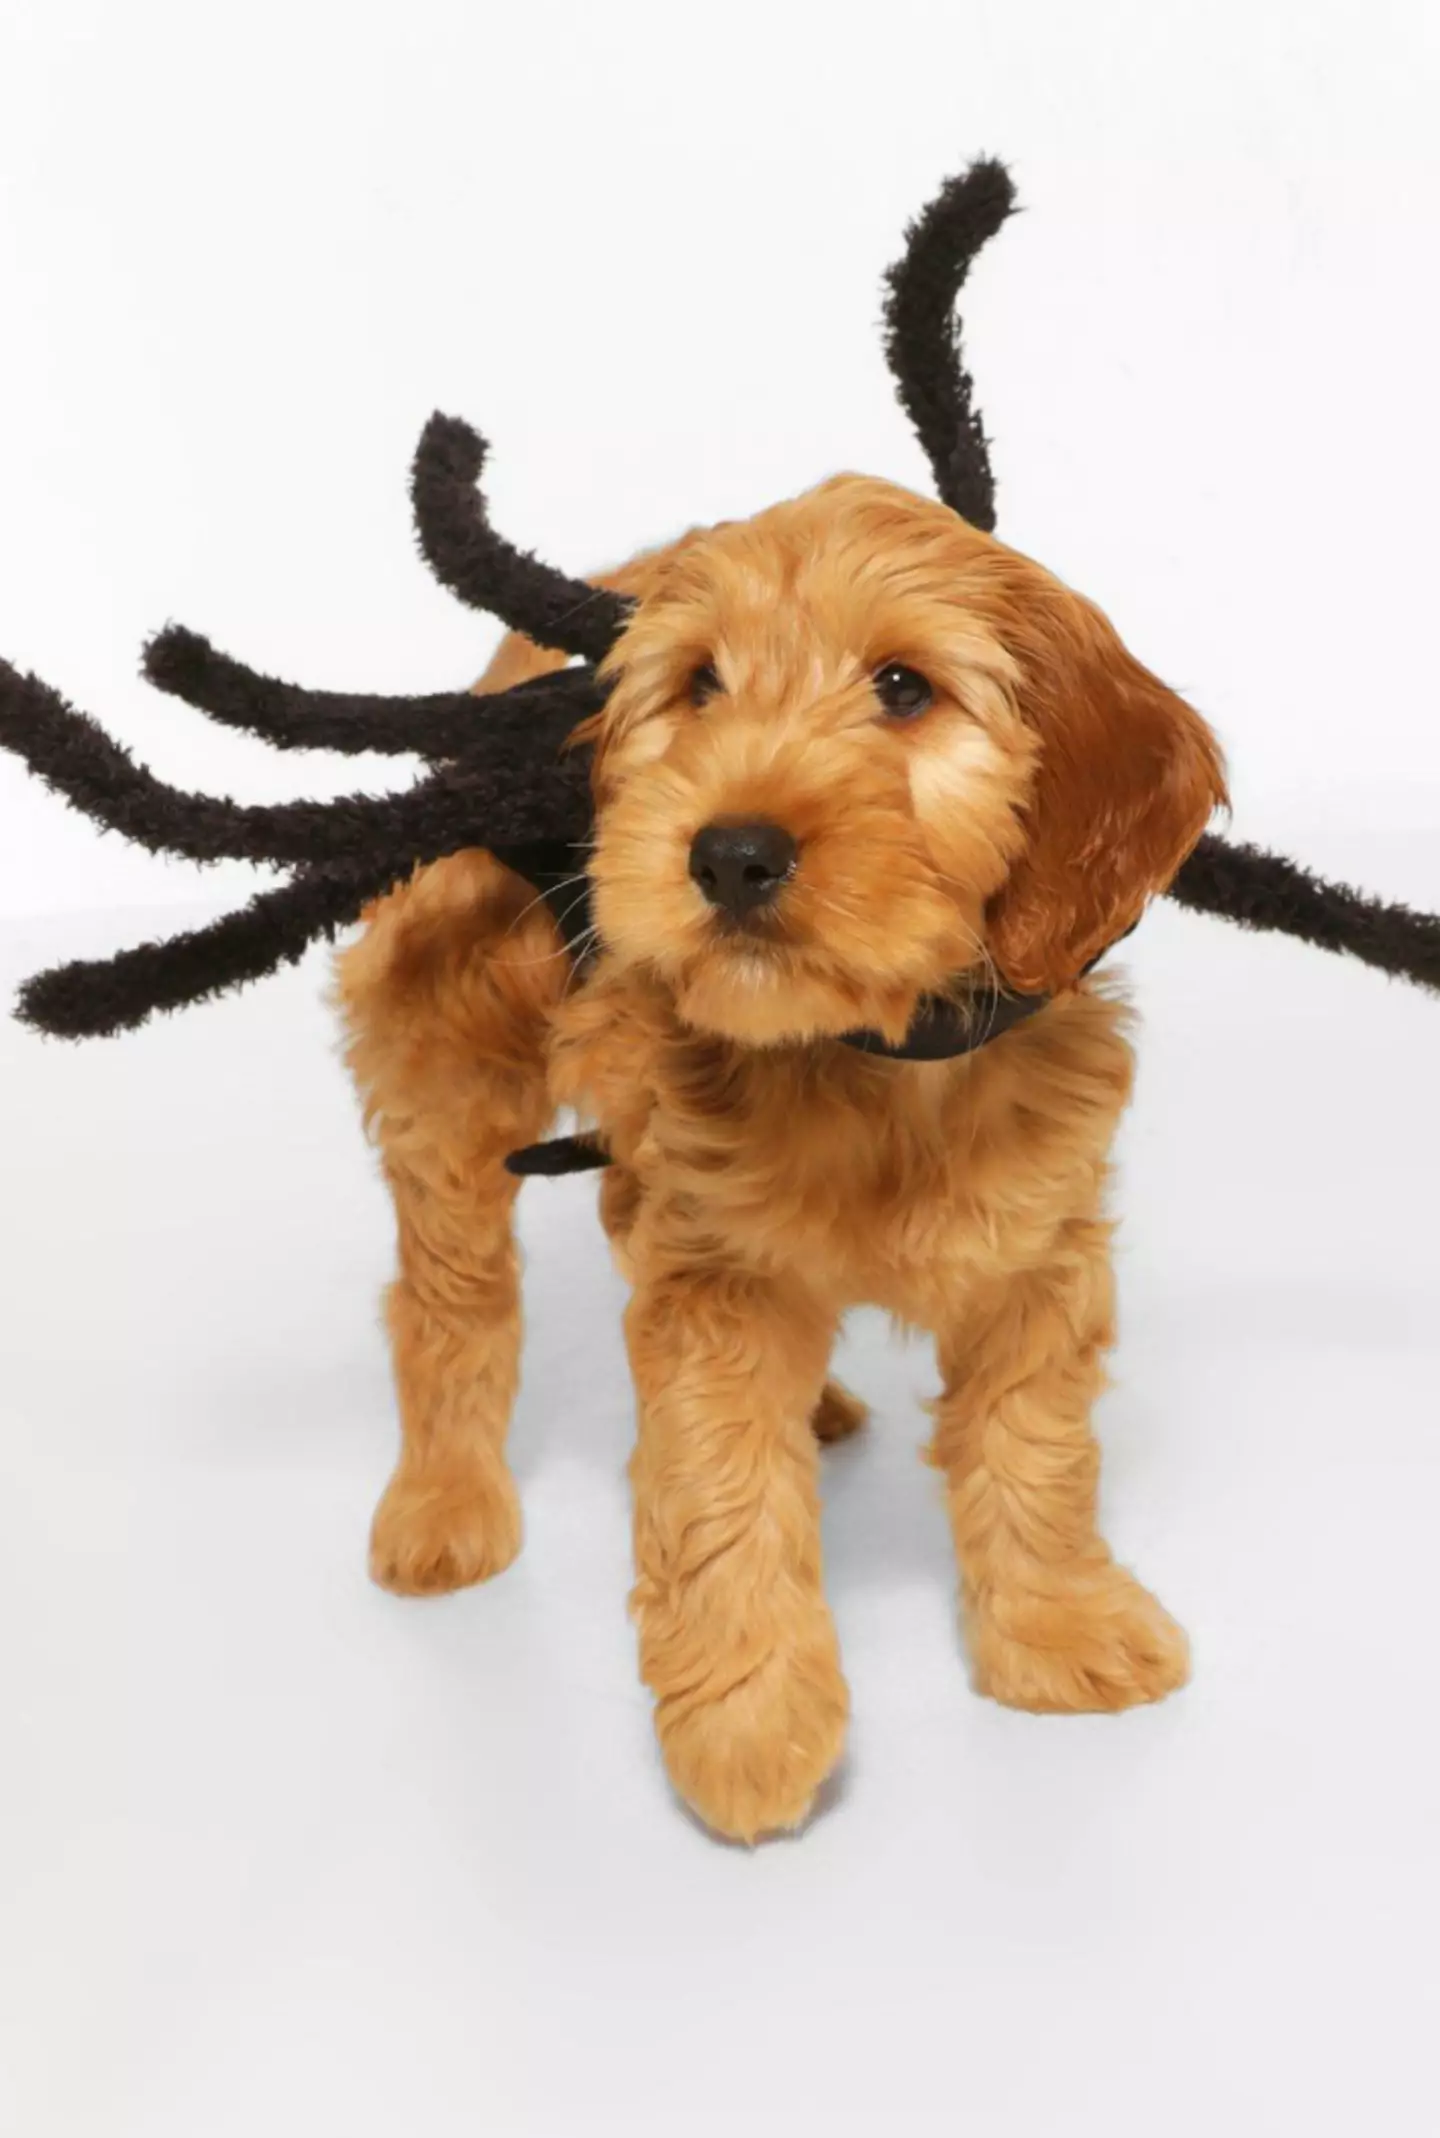 Boohoo is selling a pet friendly Halloween costume collection (